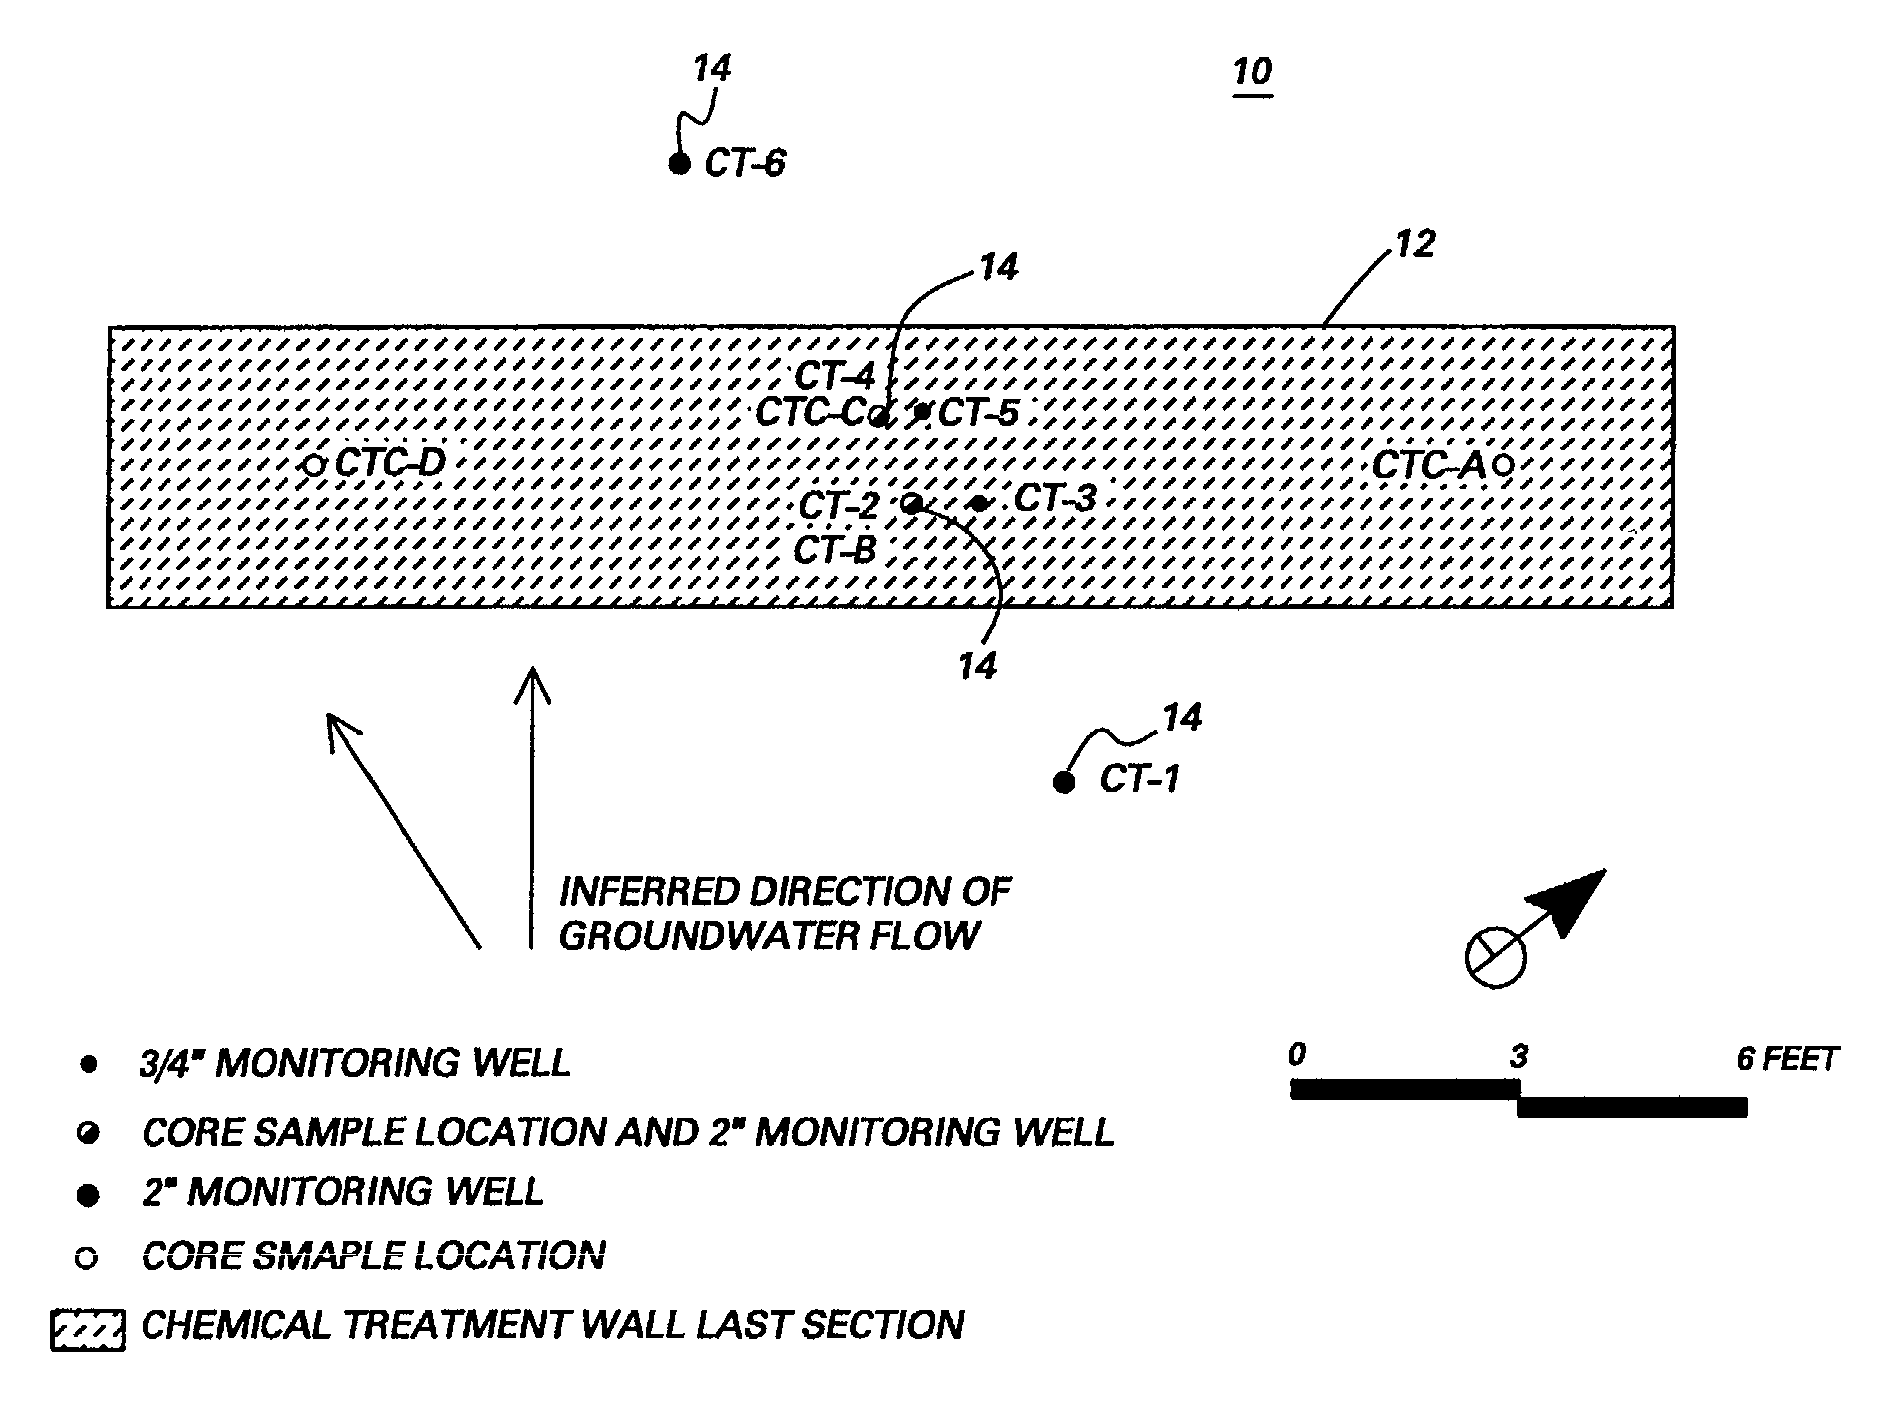 Permeable-reactive barrier monitoring method and system